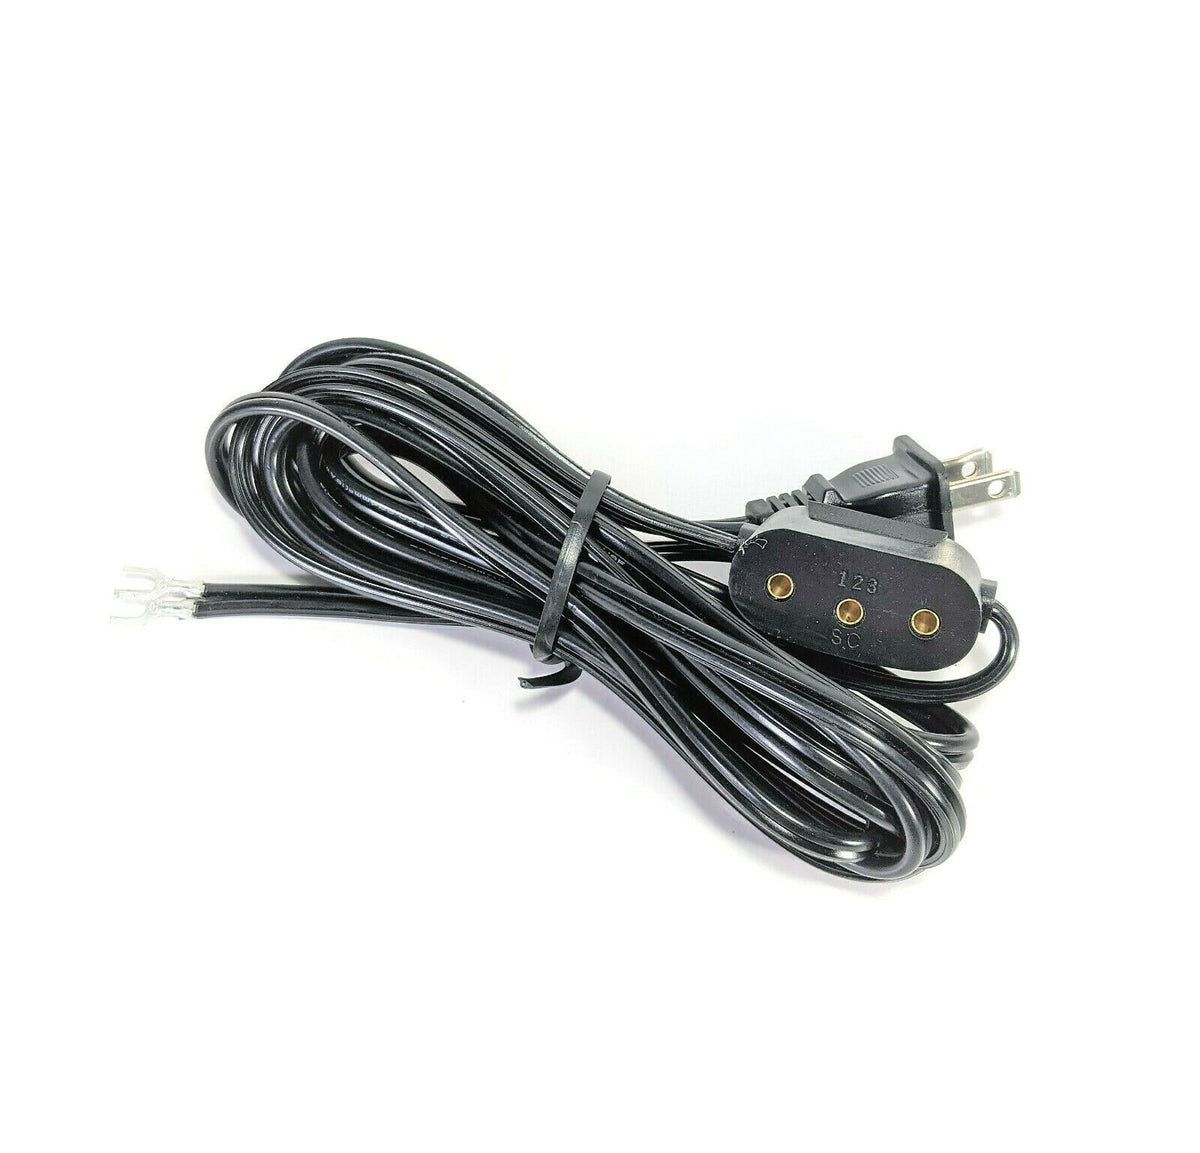 Power Lead Cord #122 (Single Lead) for Singer 15-30, 15-91 Sewing Machines